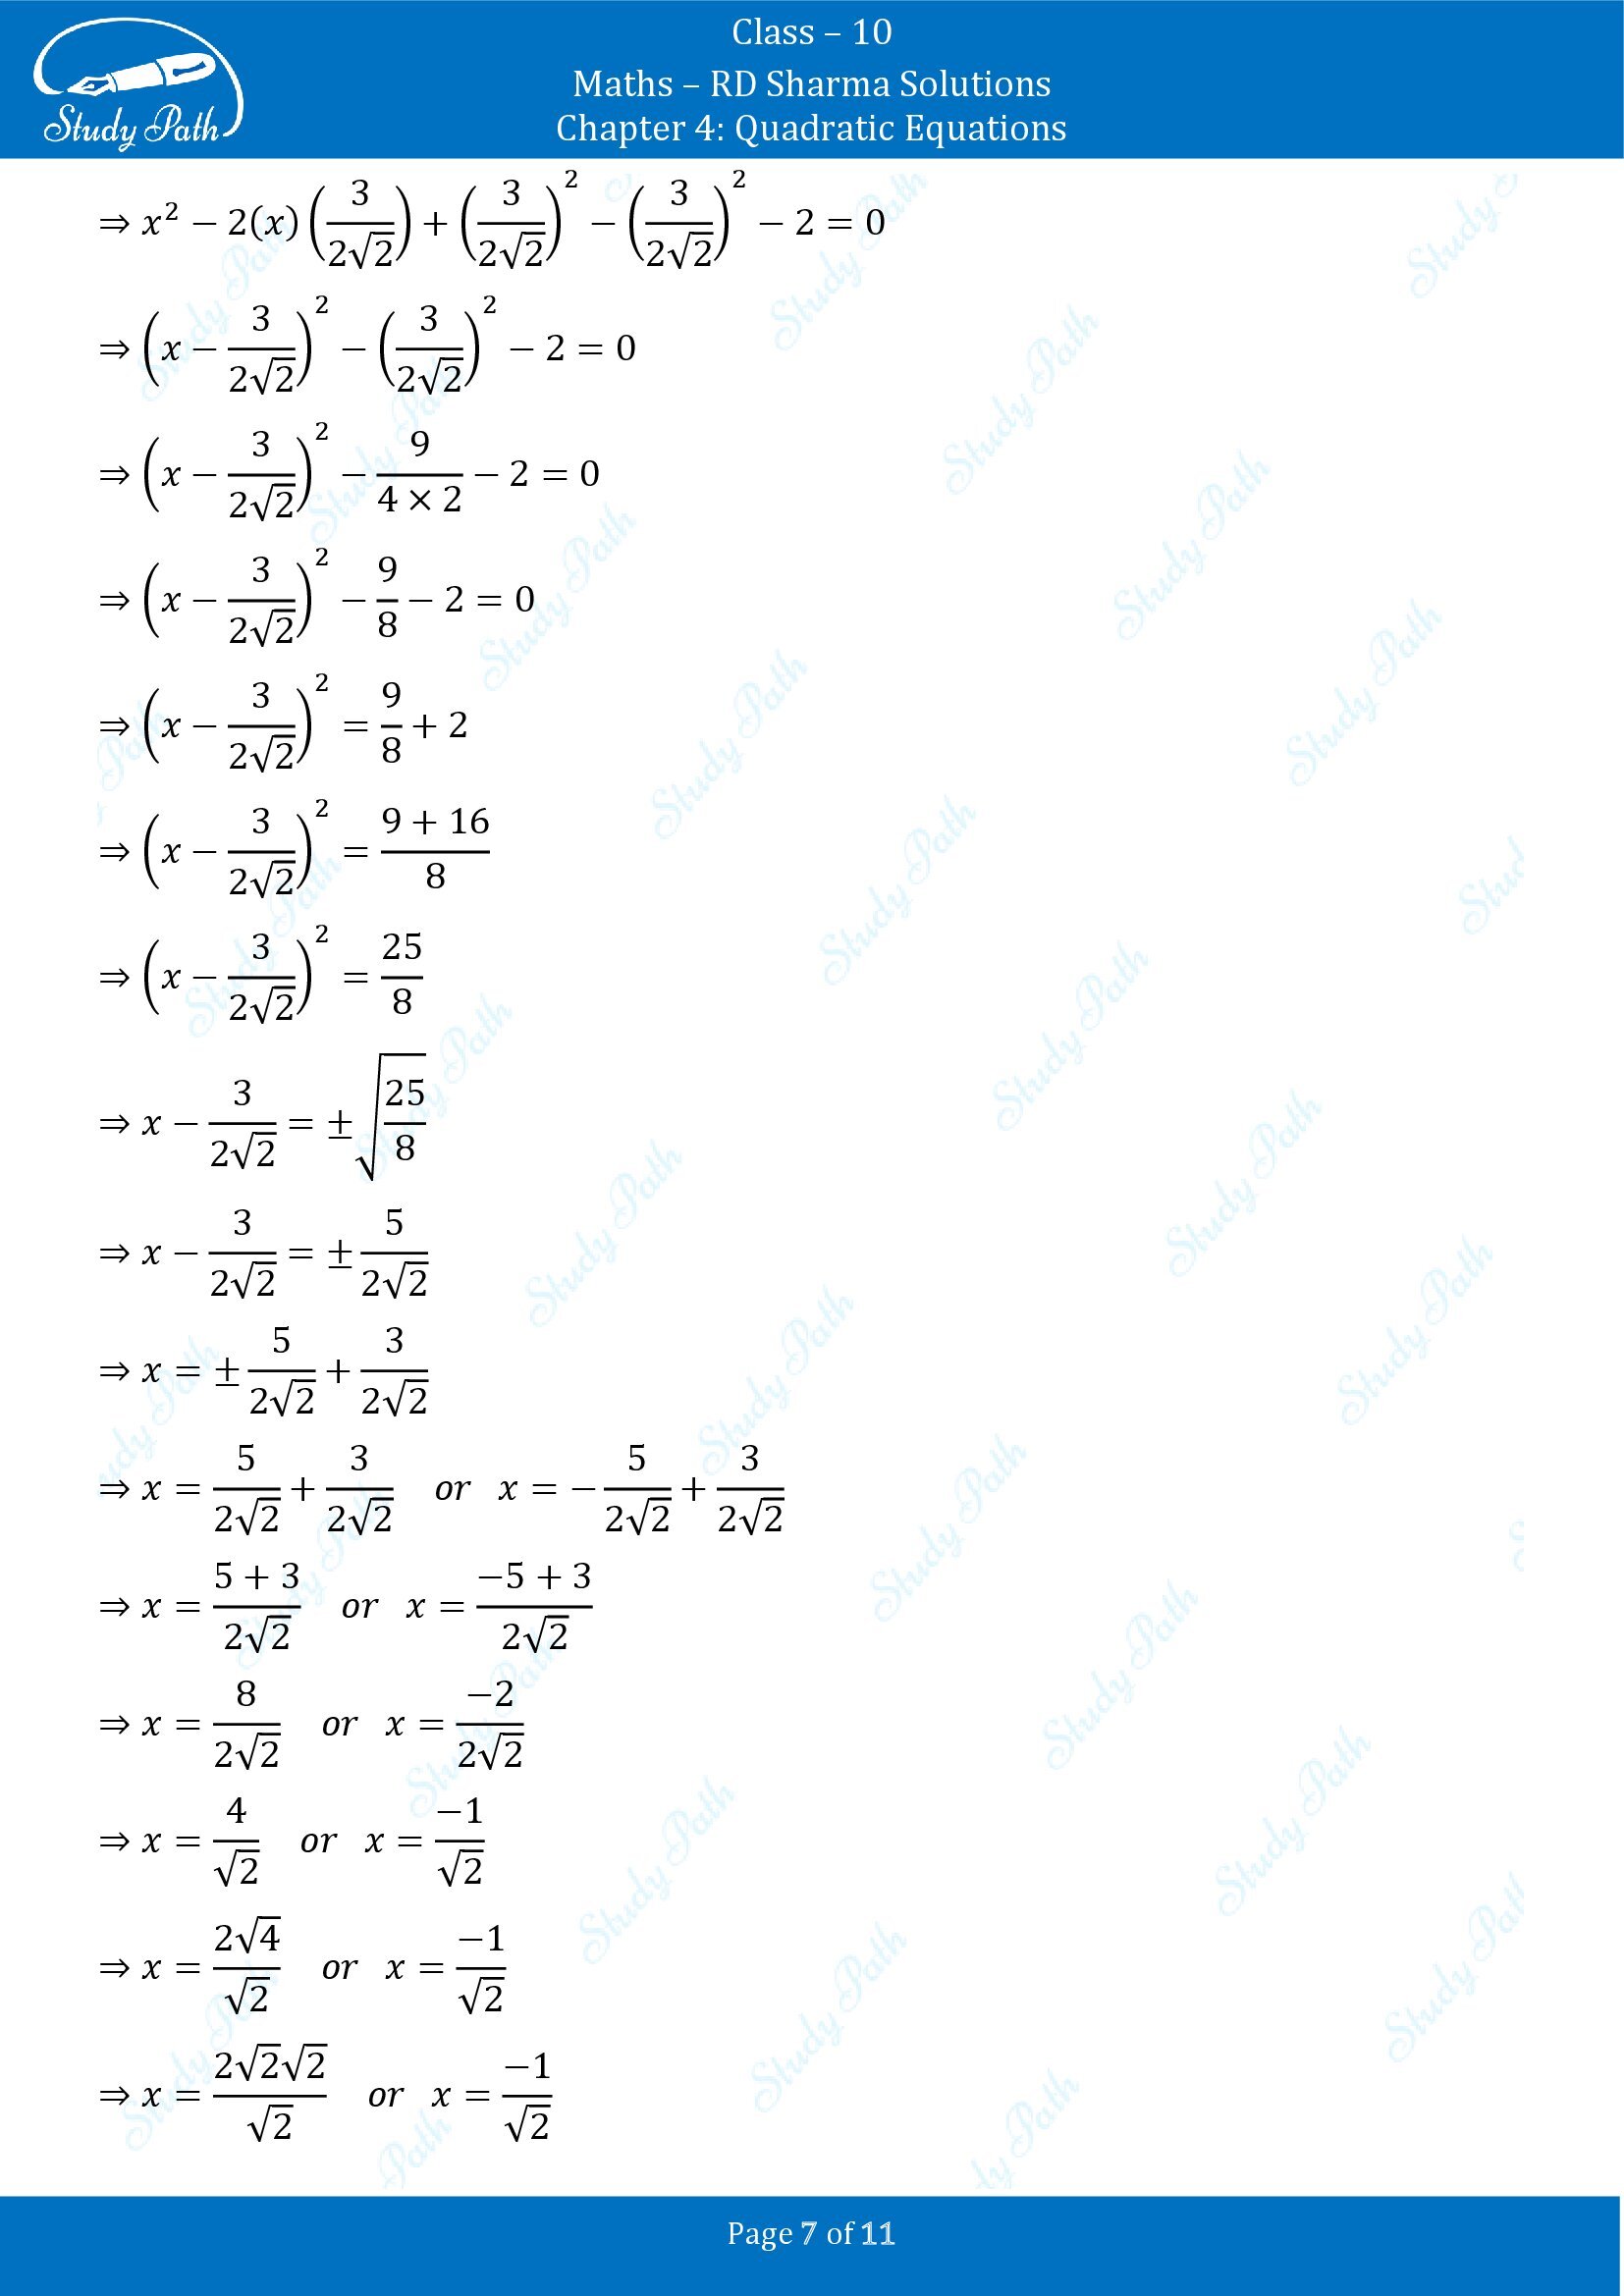 RD Sharma Solutions Class 10 Chapter 4 Quadratic Equations Exercise 4.4 00007